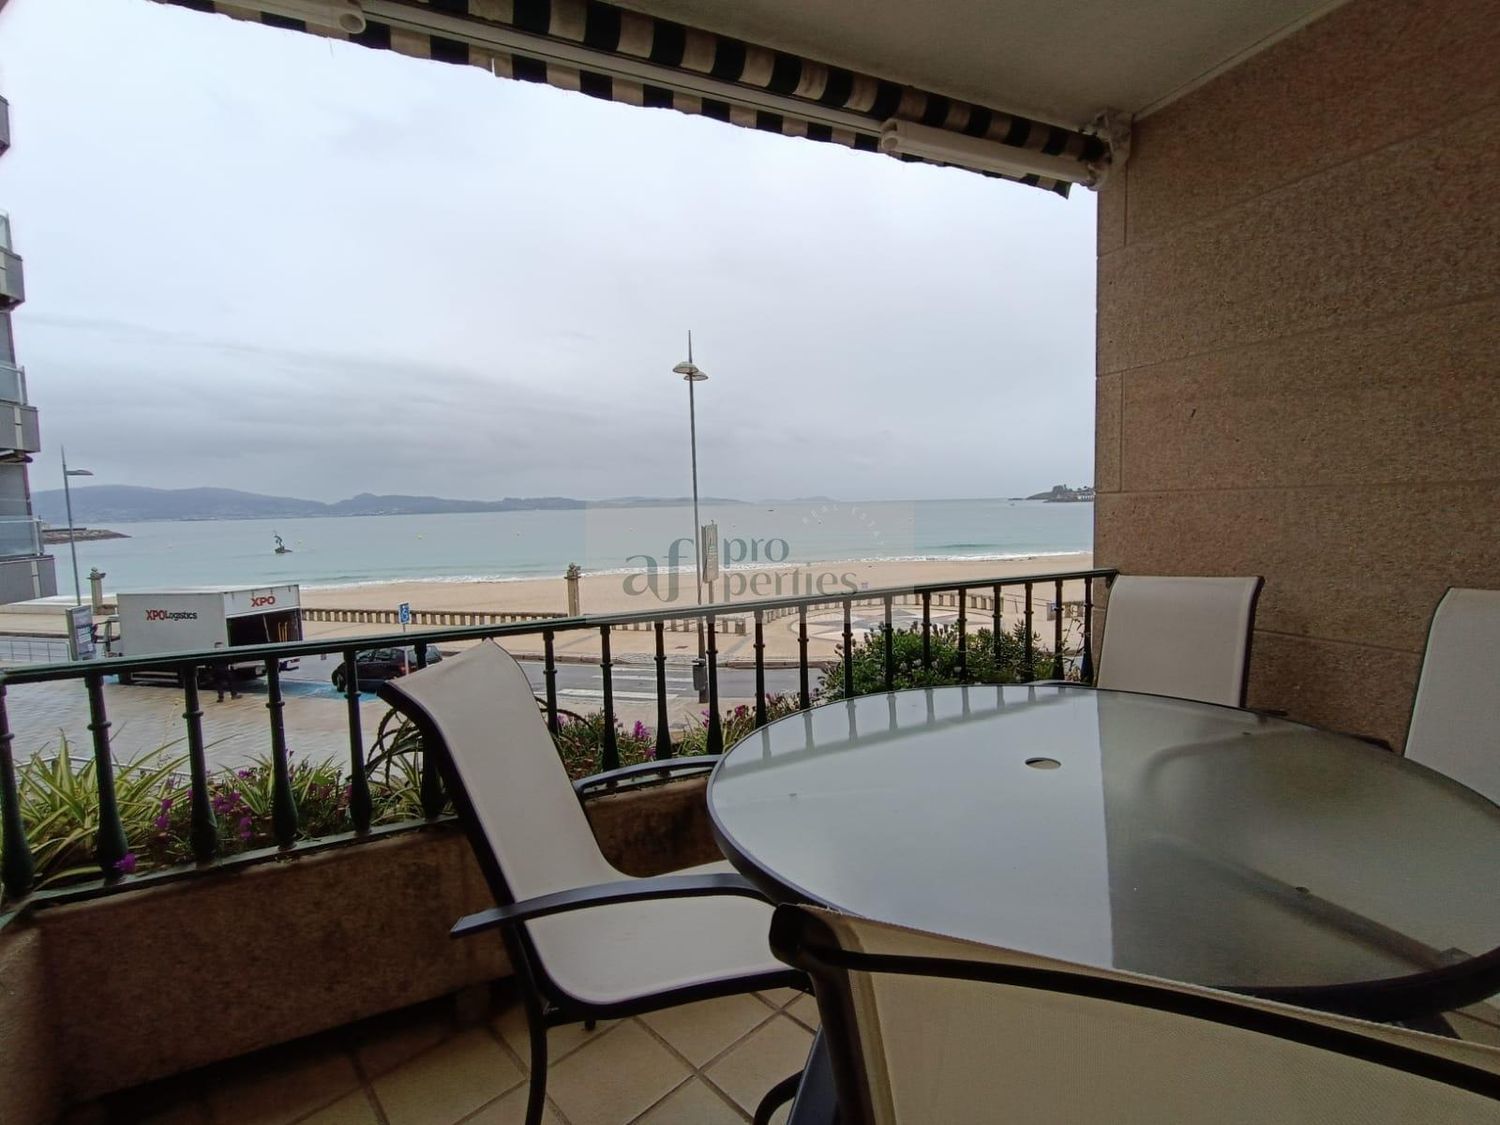 Apartment for sale on the seafront in Sanxenxo